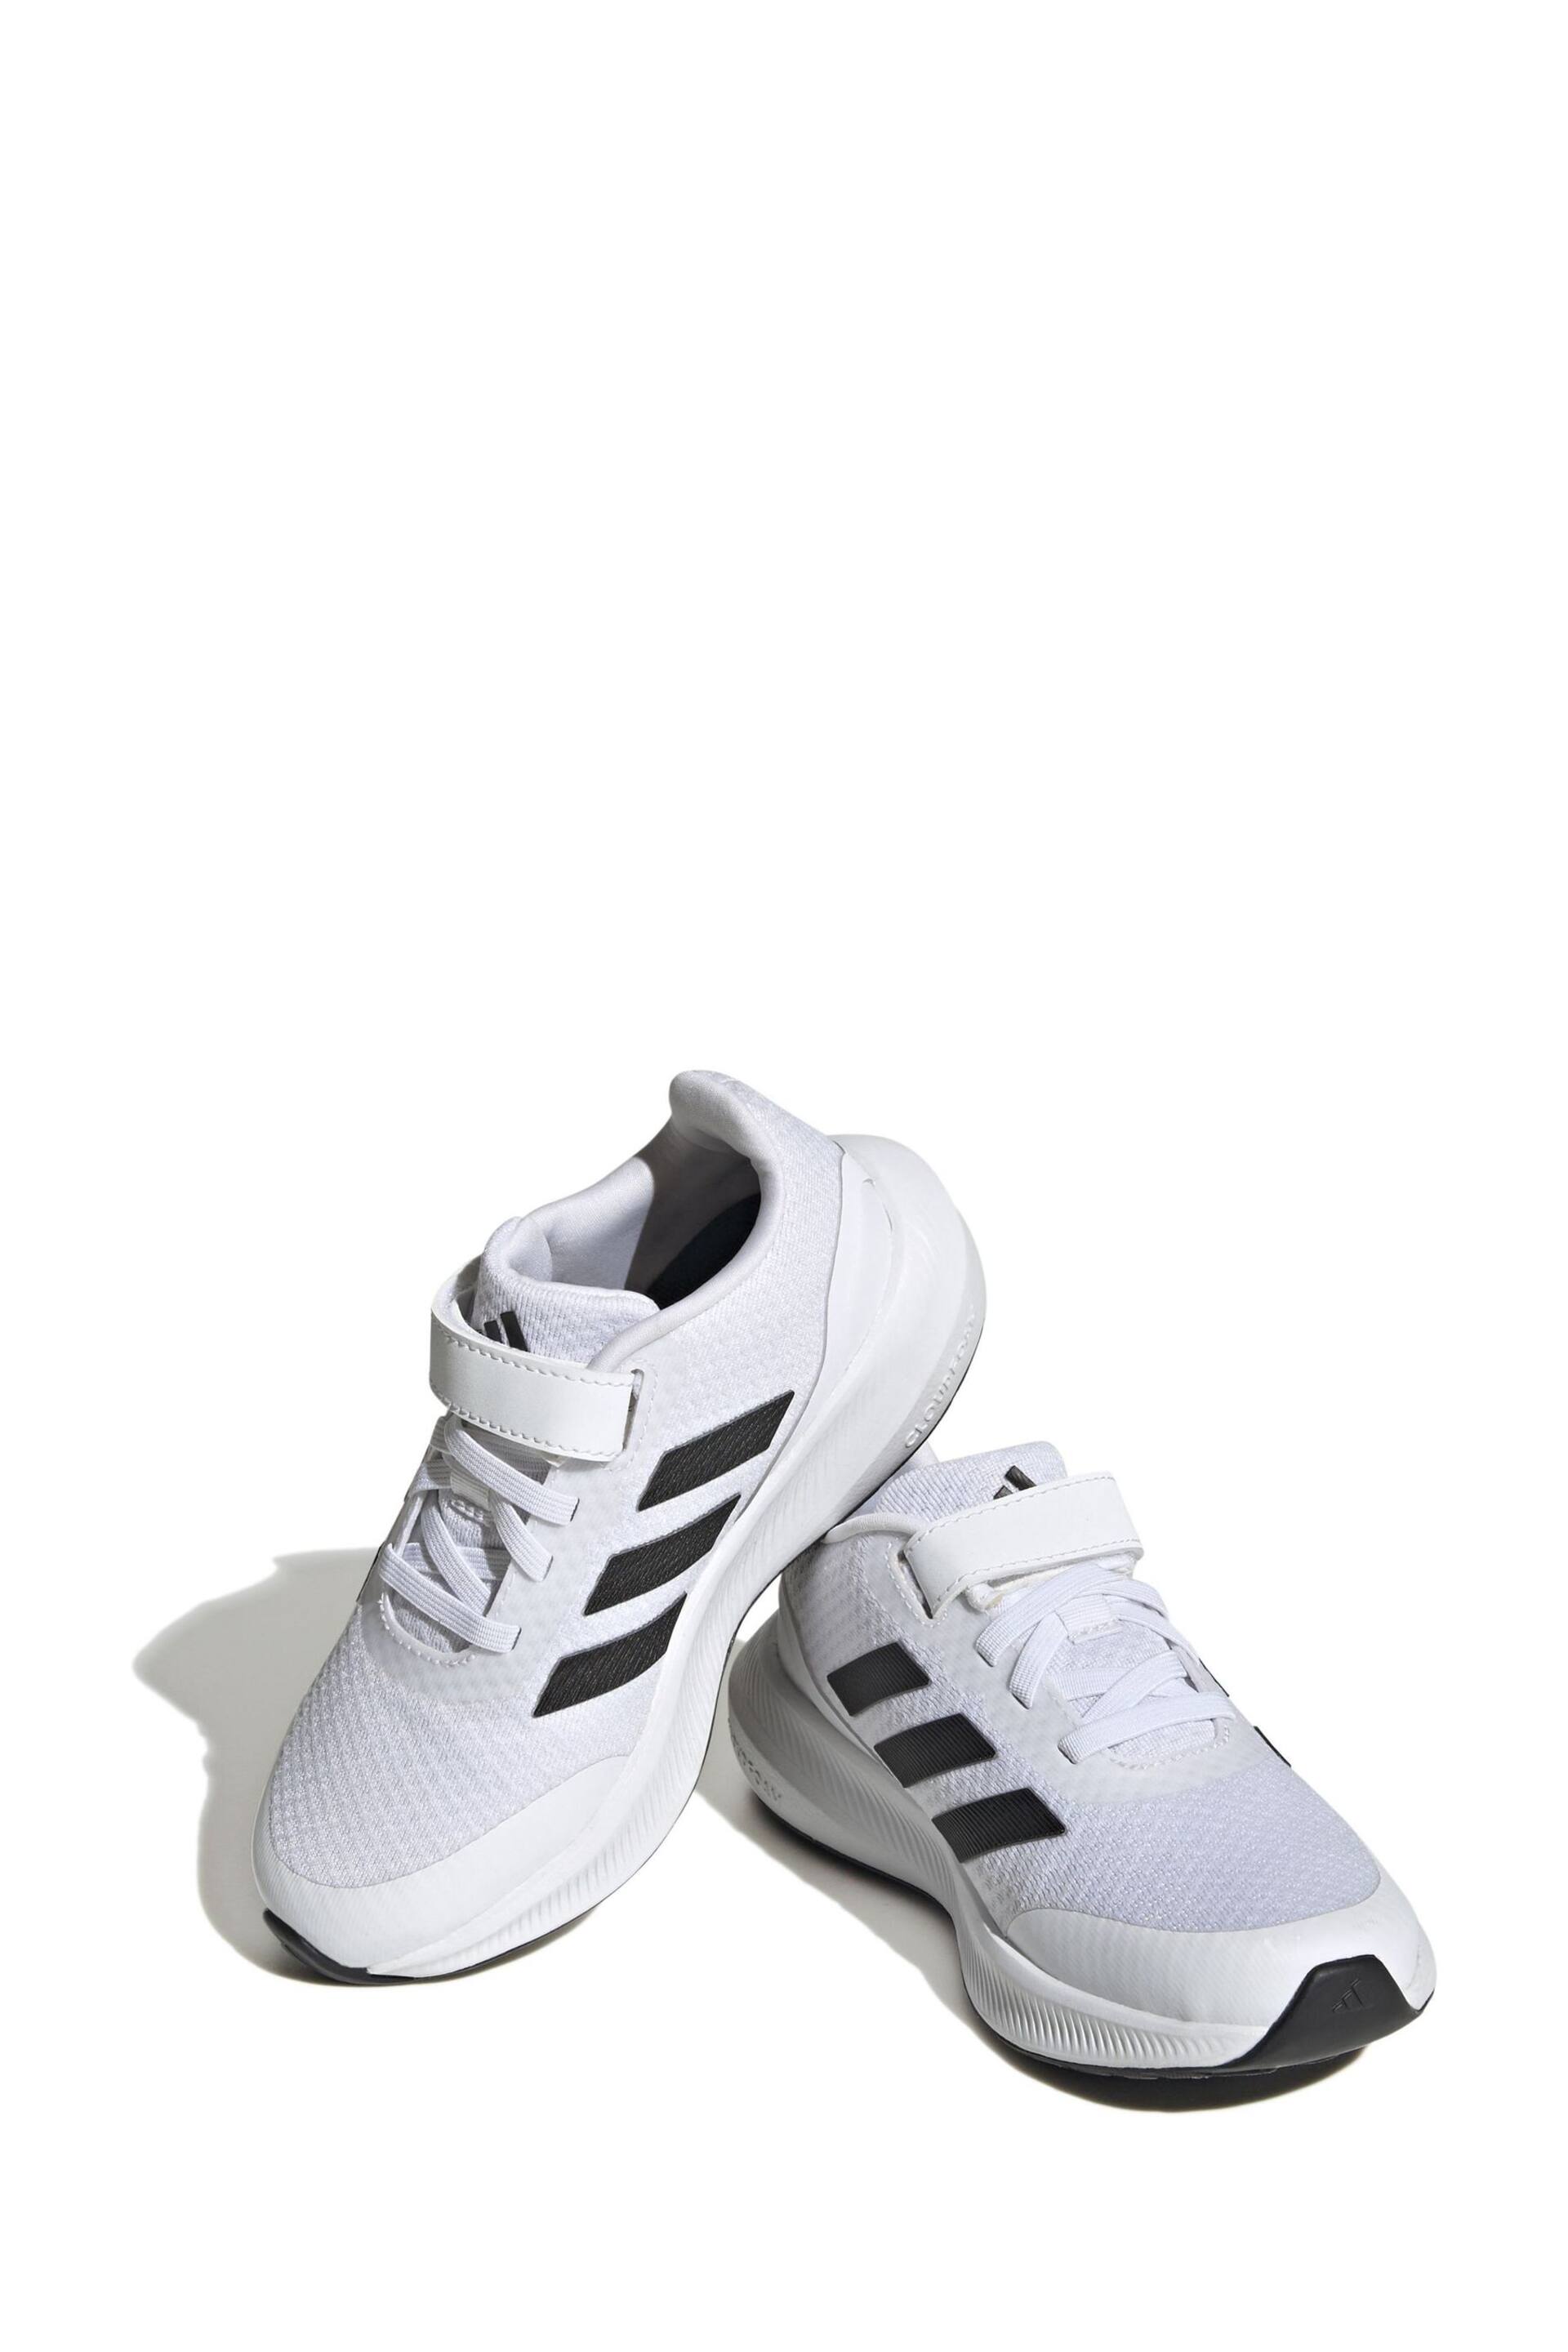 adidas White Sportswear Runfalcon 3.0 Elastic Lace Top Strap Trainers - Image 5 of 9